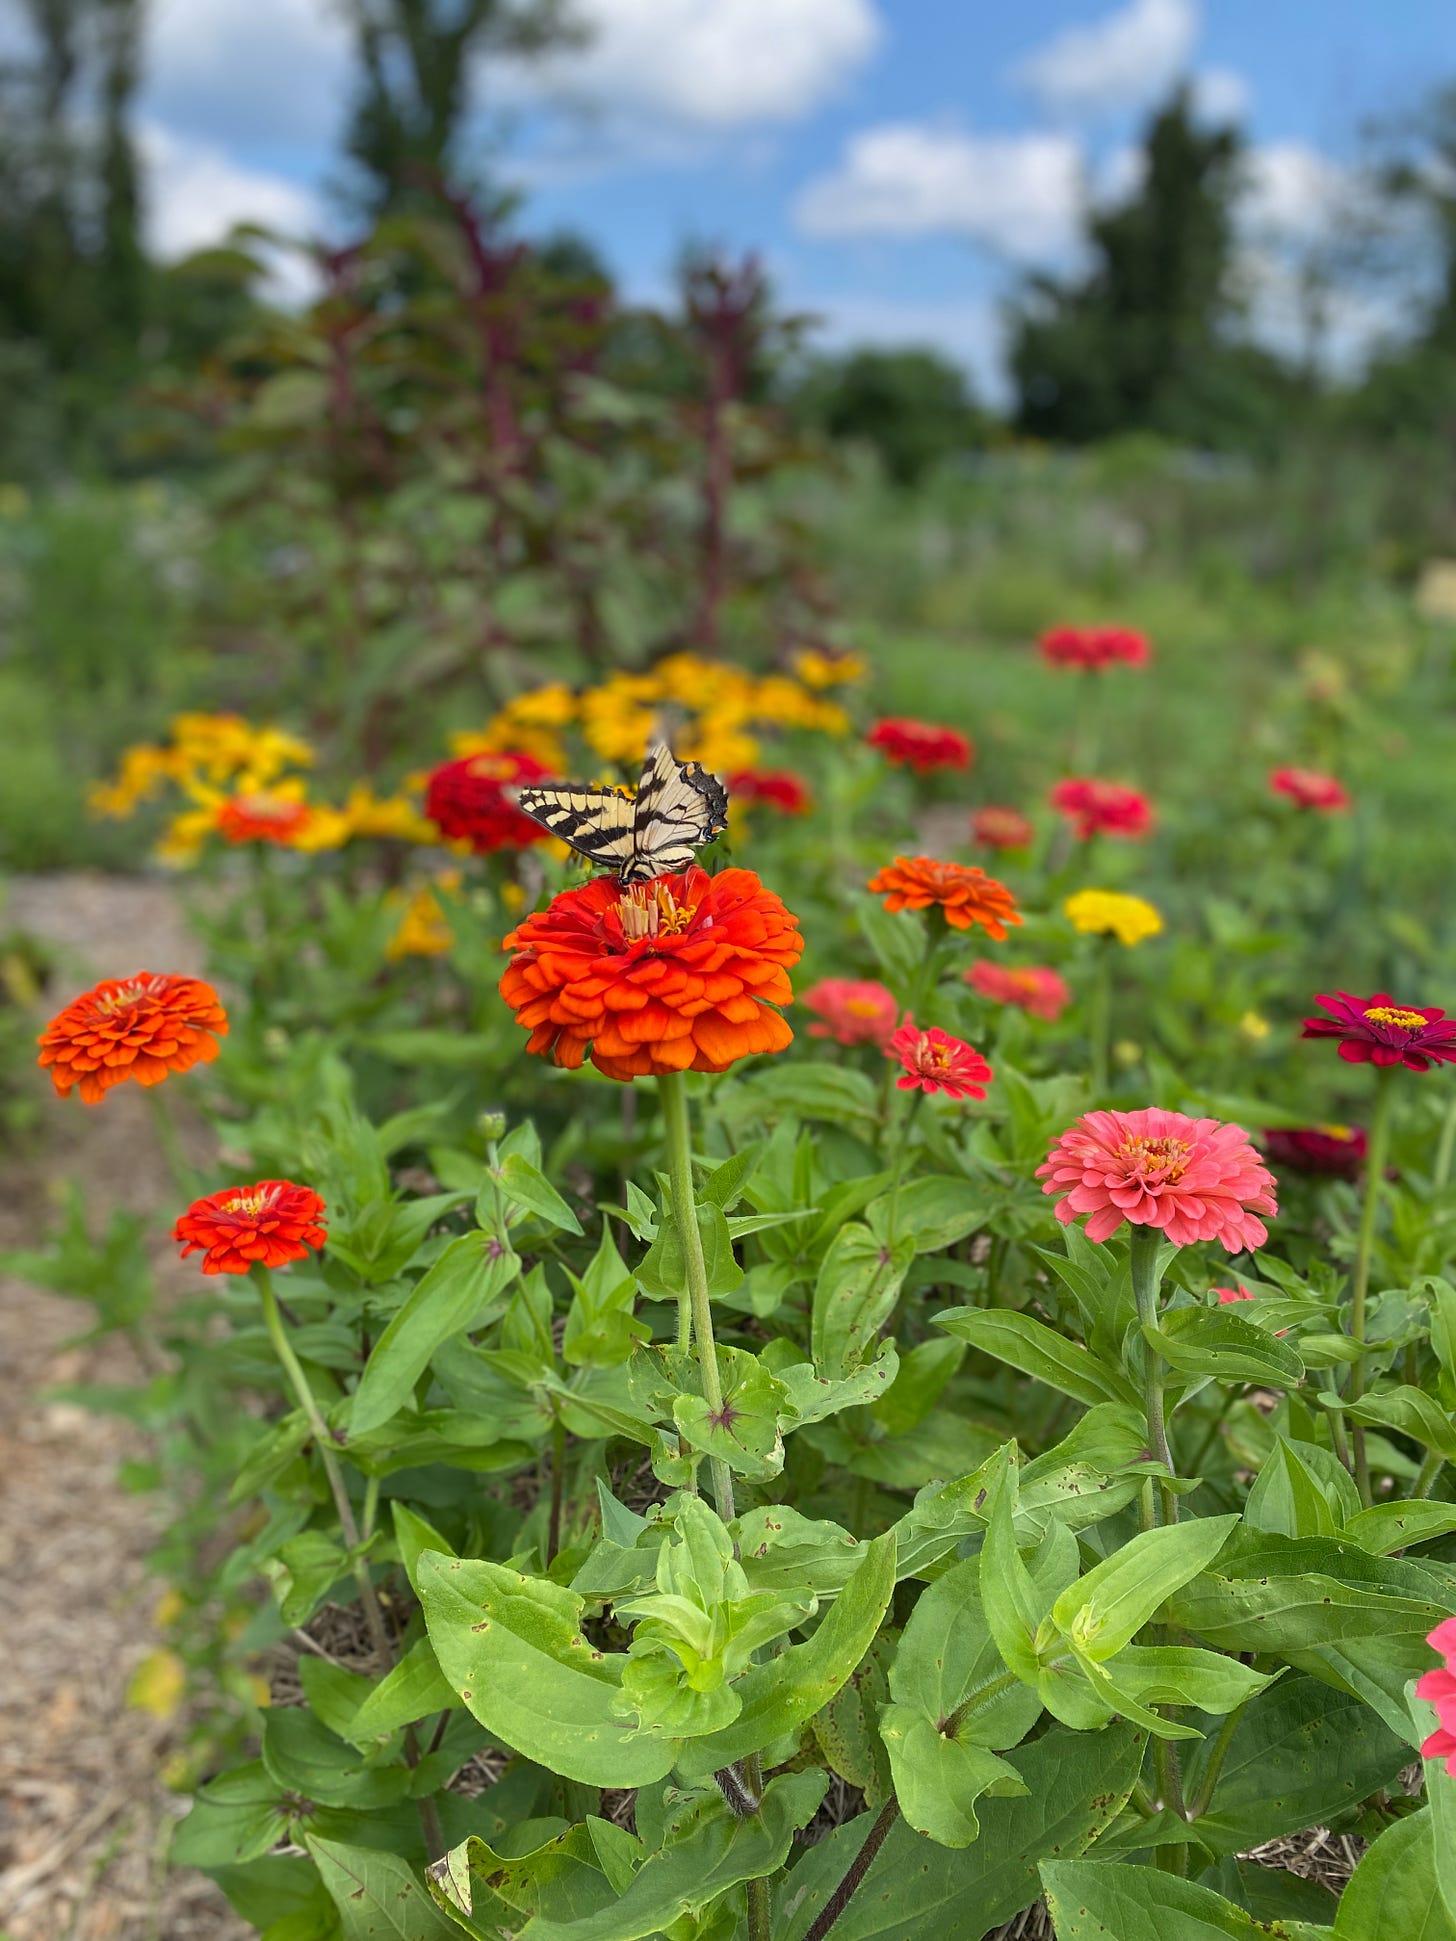 A tiger swallowtail butterfly perches on an orange zinnia, in a patch of colorful zinnias. Blurry amaranth plants and a blue sky appear in the background.